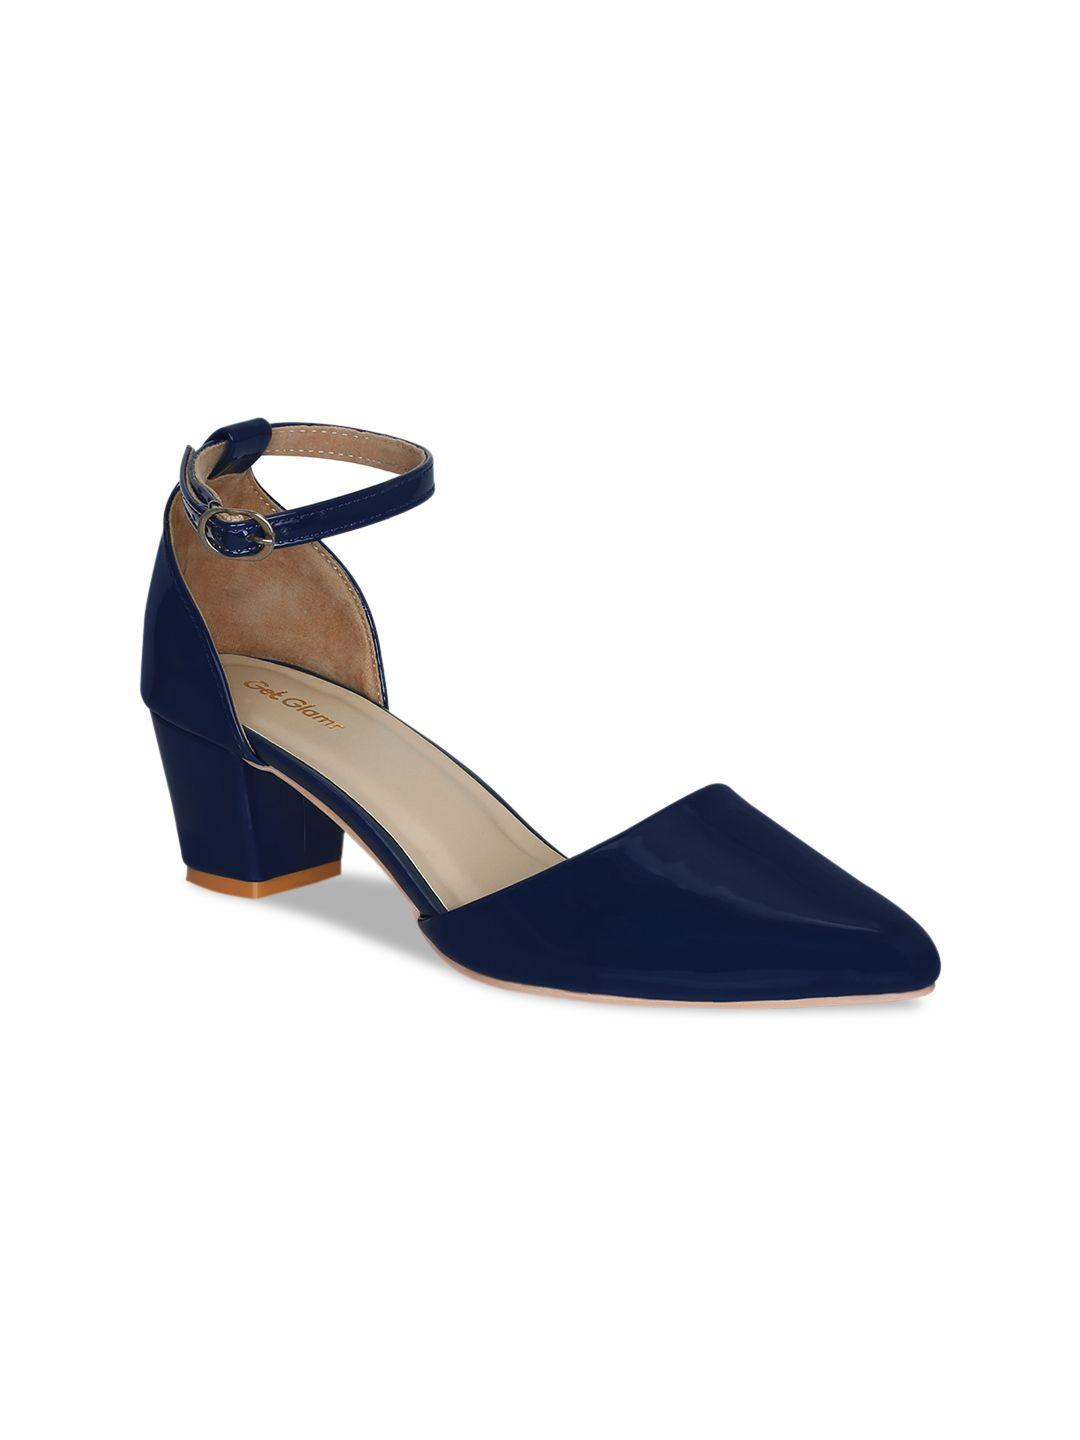 get glamr navy blue block pumps with buckles